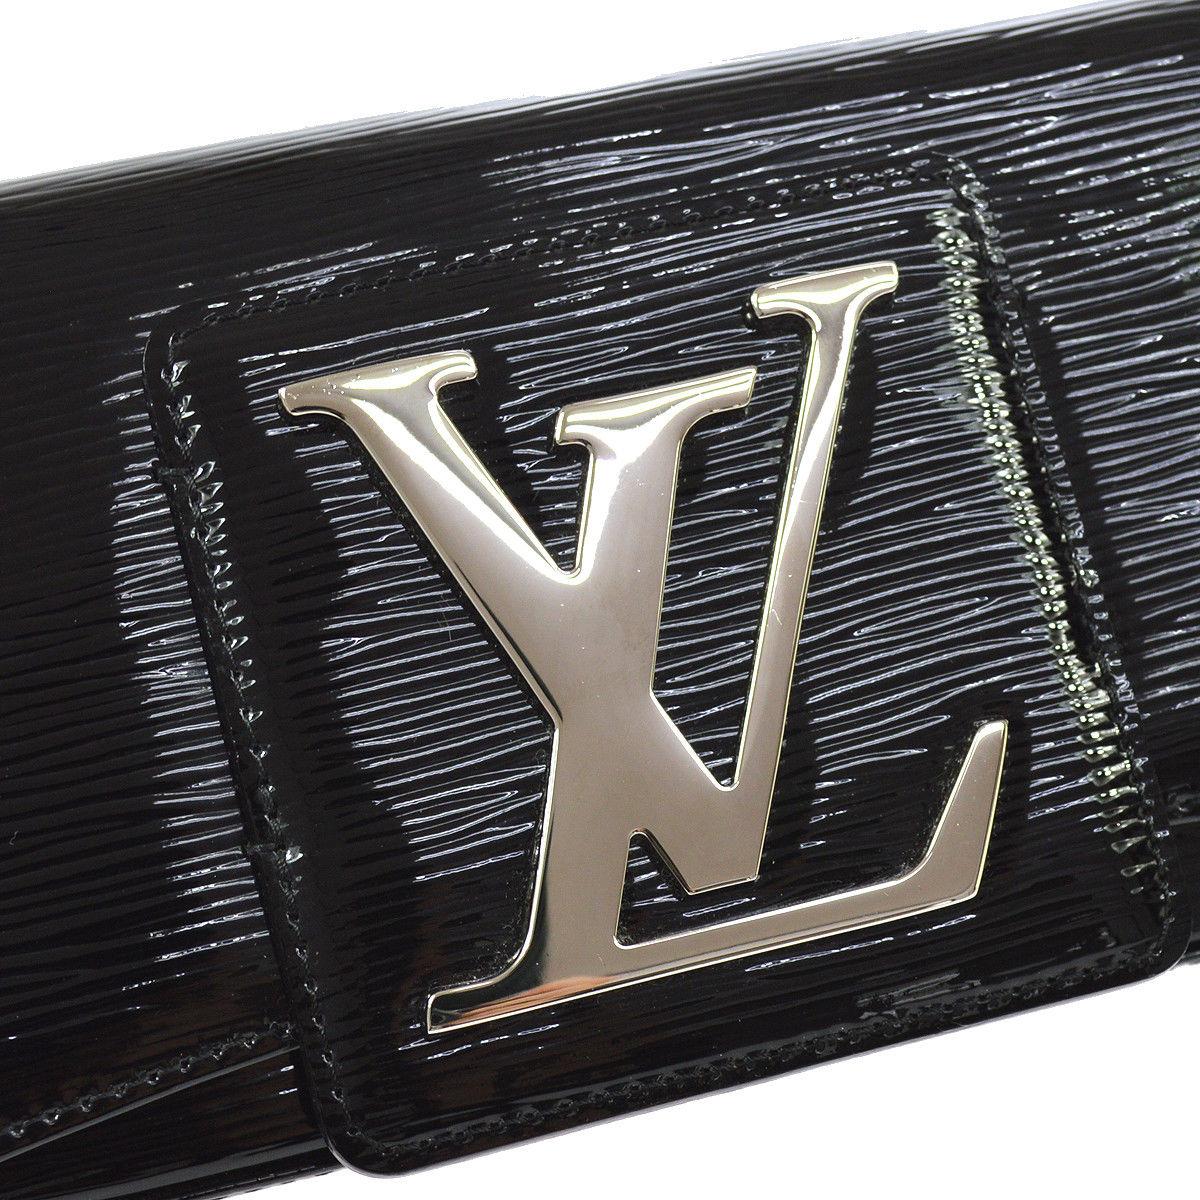 Louis Vuitton Black Patent Leather Large Silver LV Evening Clutch Flap Bag

Lackleder
Silver tone hardware
Snap closure
Woven lining
Made in Spain
Measure 10